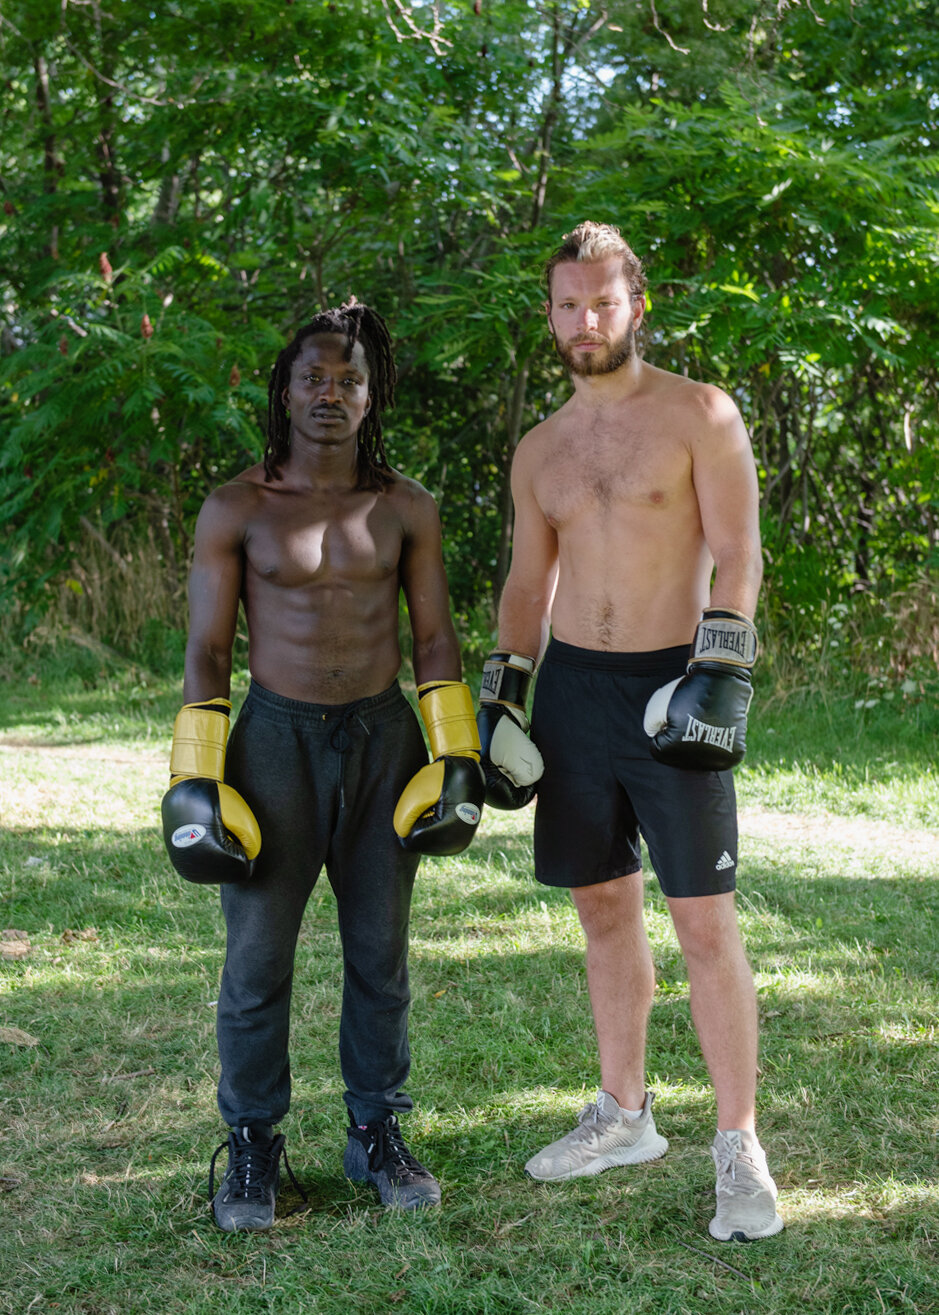  Godfrey and Jared boxing at Earlscourt Park in Toronto 